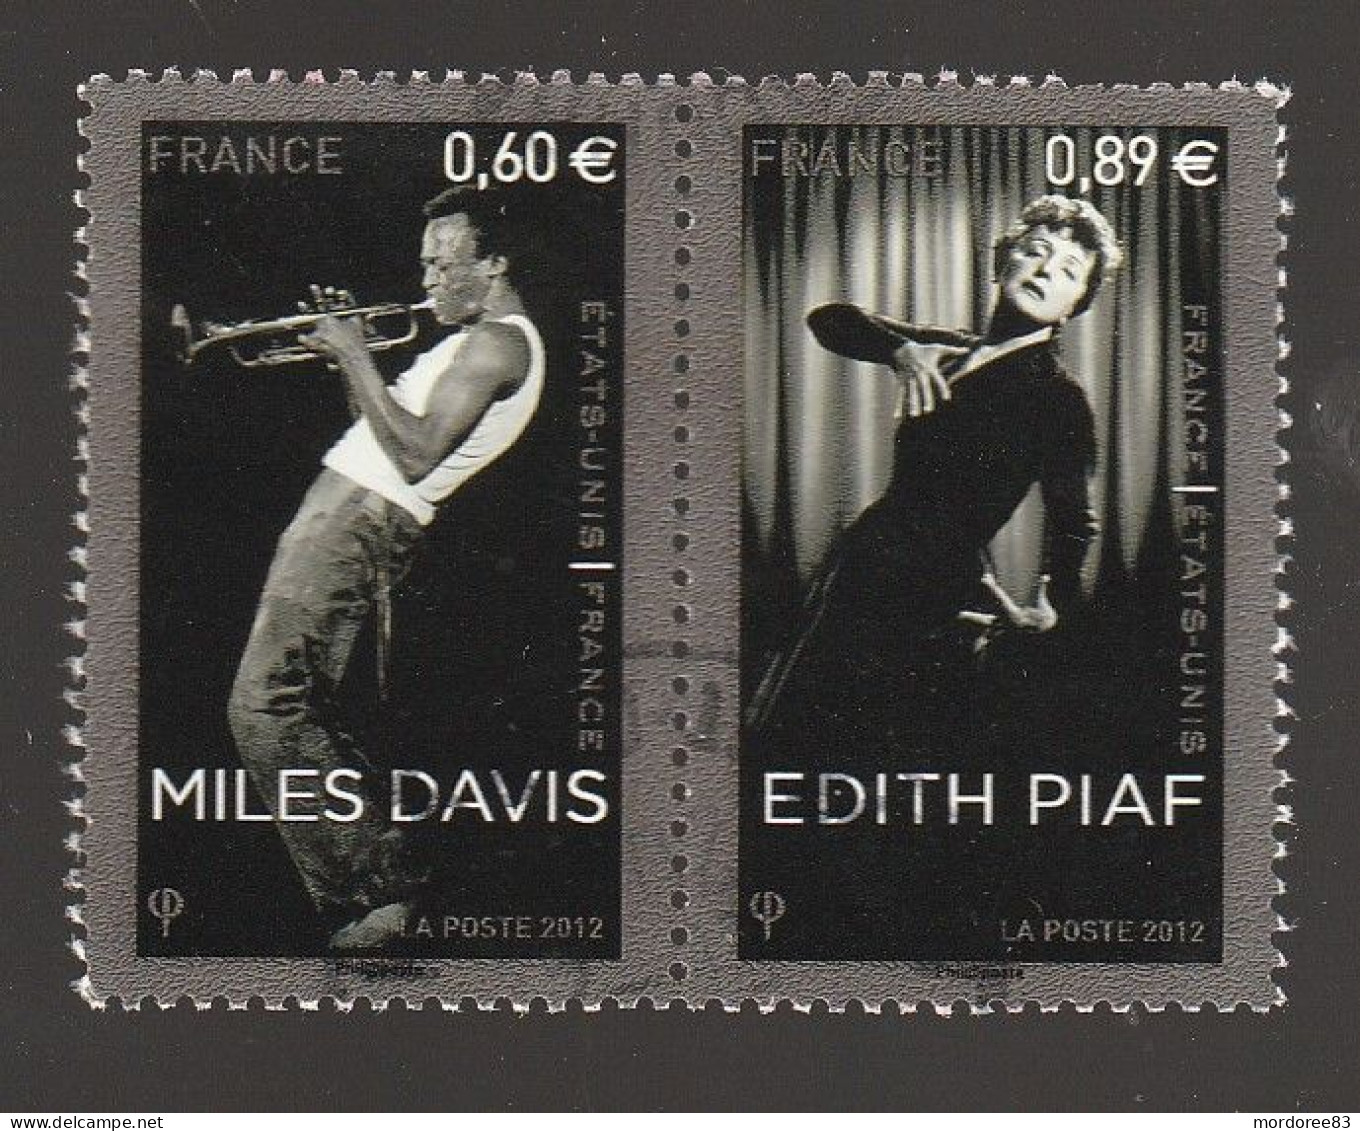 FRANCE 2012 PAIRE EDITH PIAF MILES DAVIS YT P 4671 OBLITERE (note) - Used Stamps